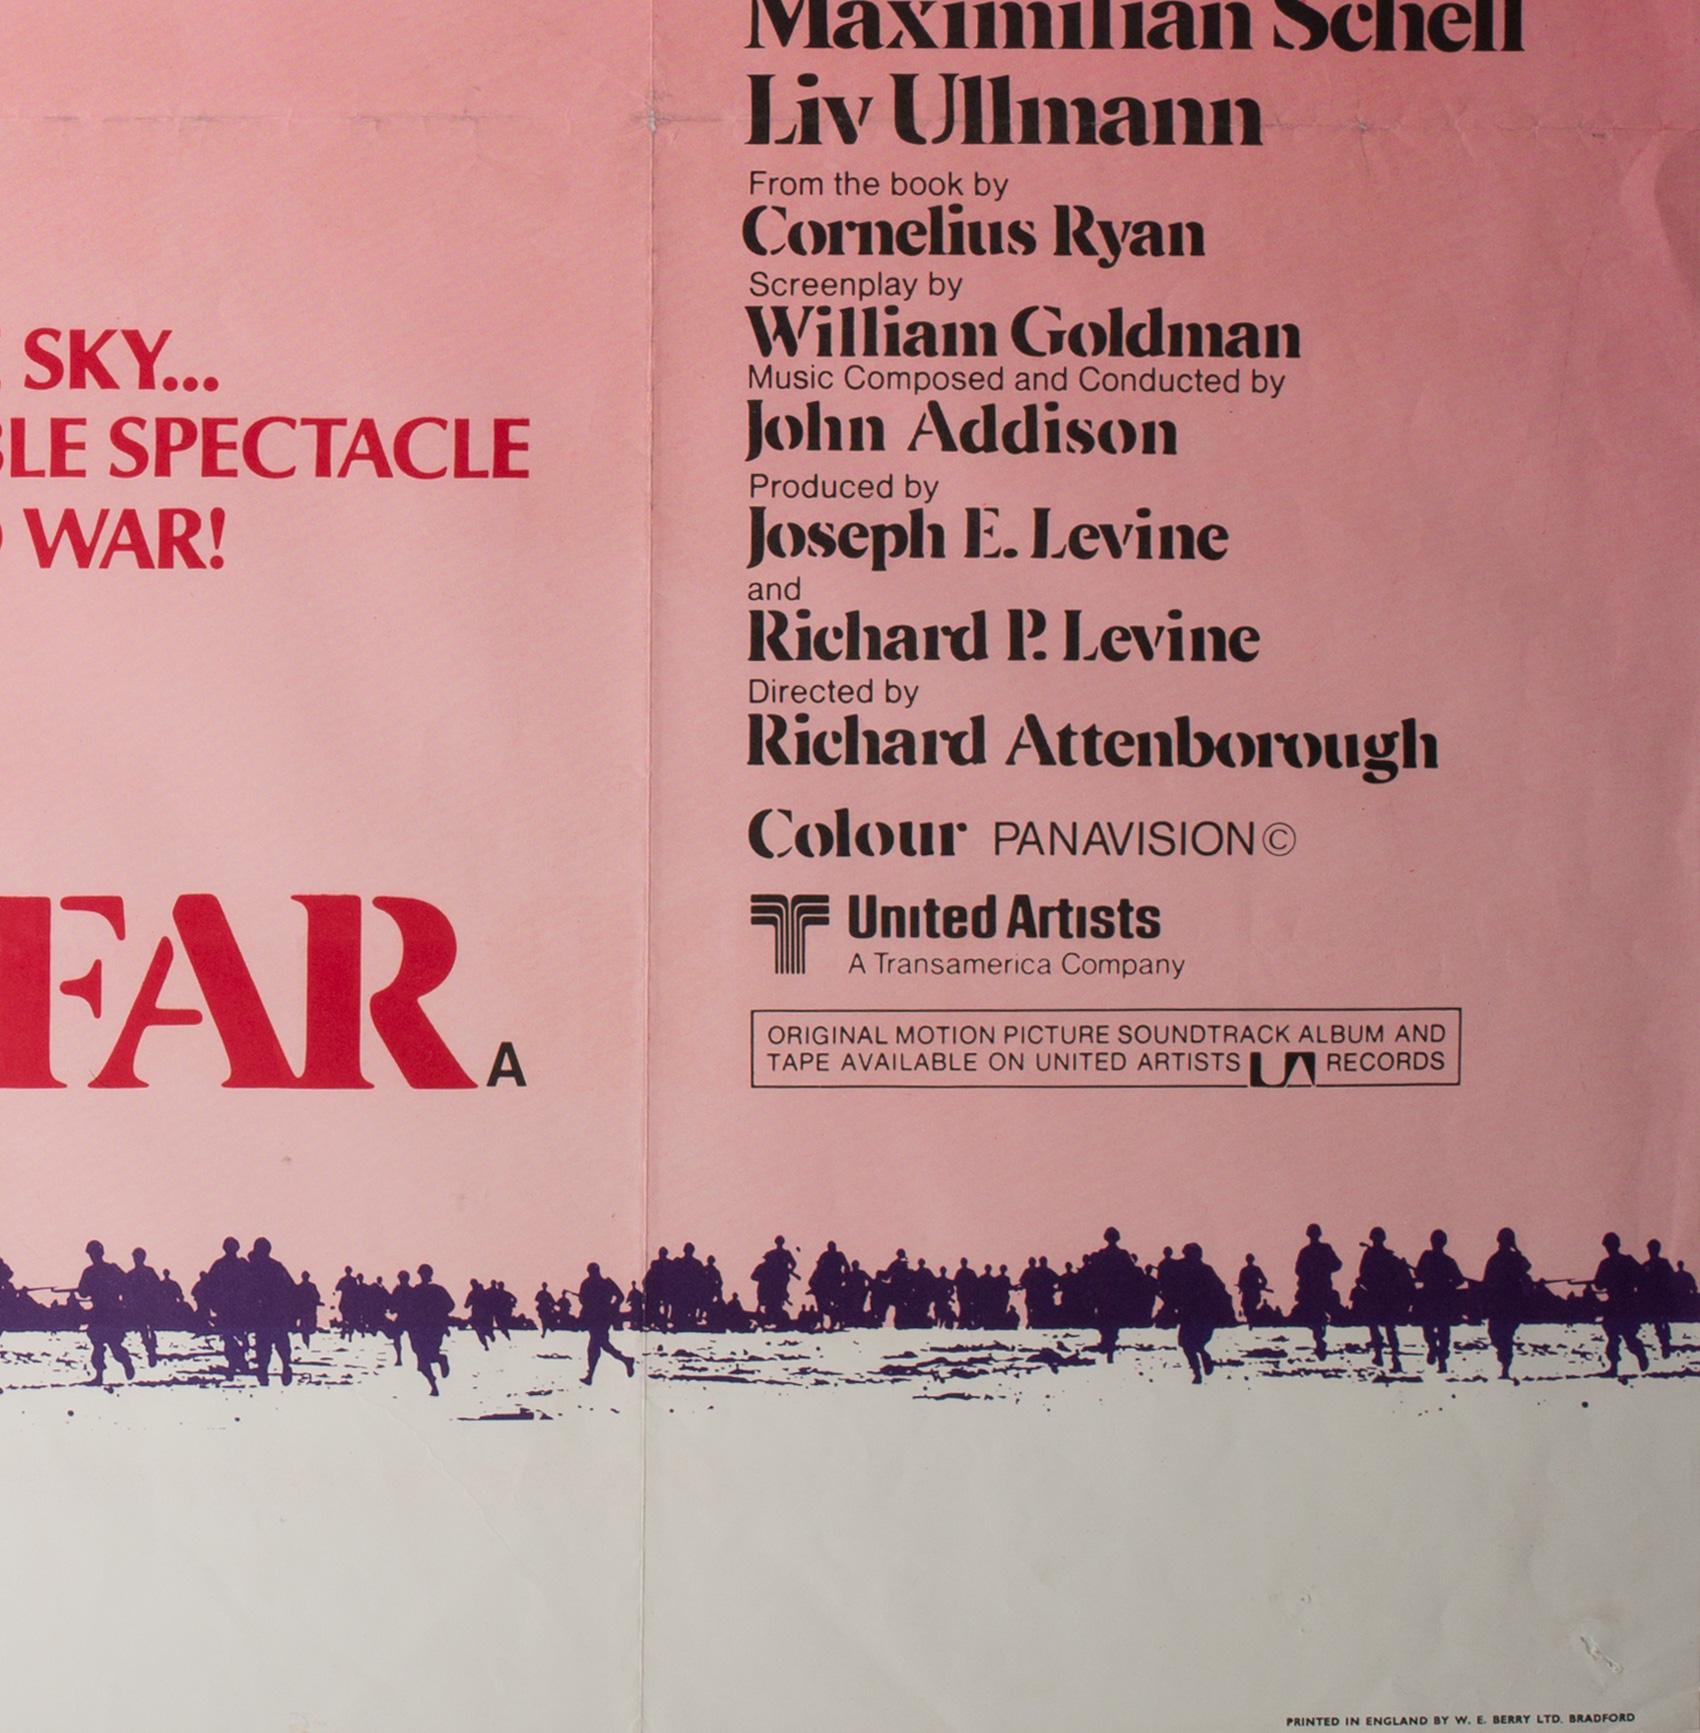 “Out of the sky…The most incredible spectacle of men and war!”

Fabulous original British film poster for 1970s war Epic A Bridge Too Far. The style B poster being by far the most interesting for the title.

In Excellent/Near Mint Folded (as